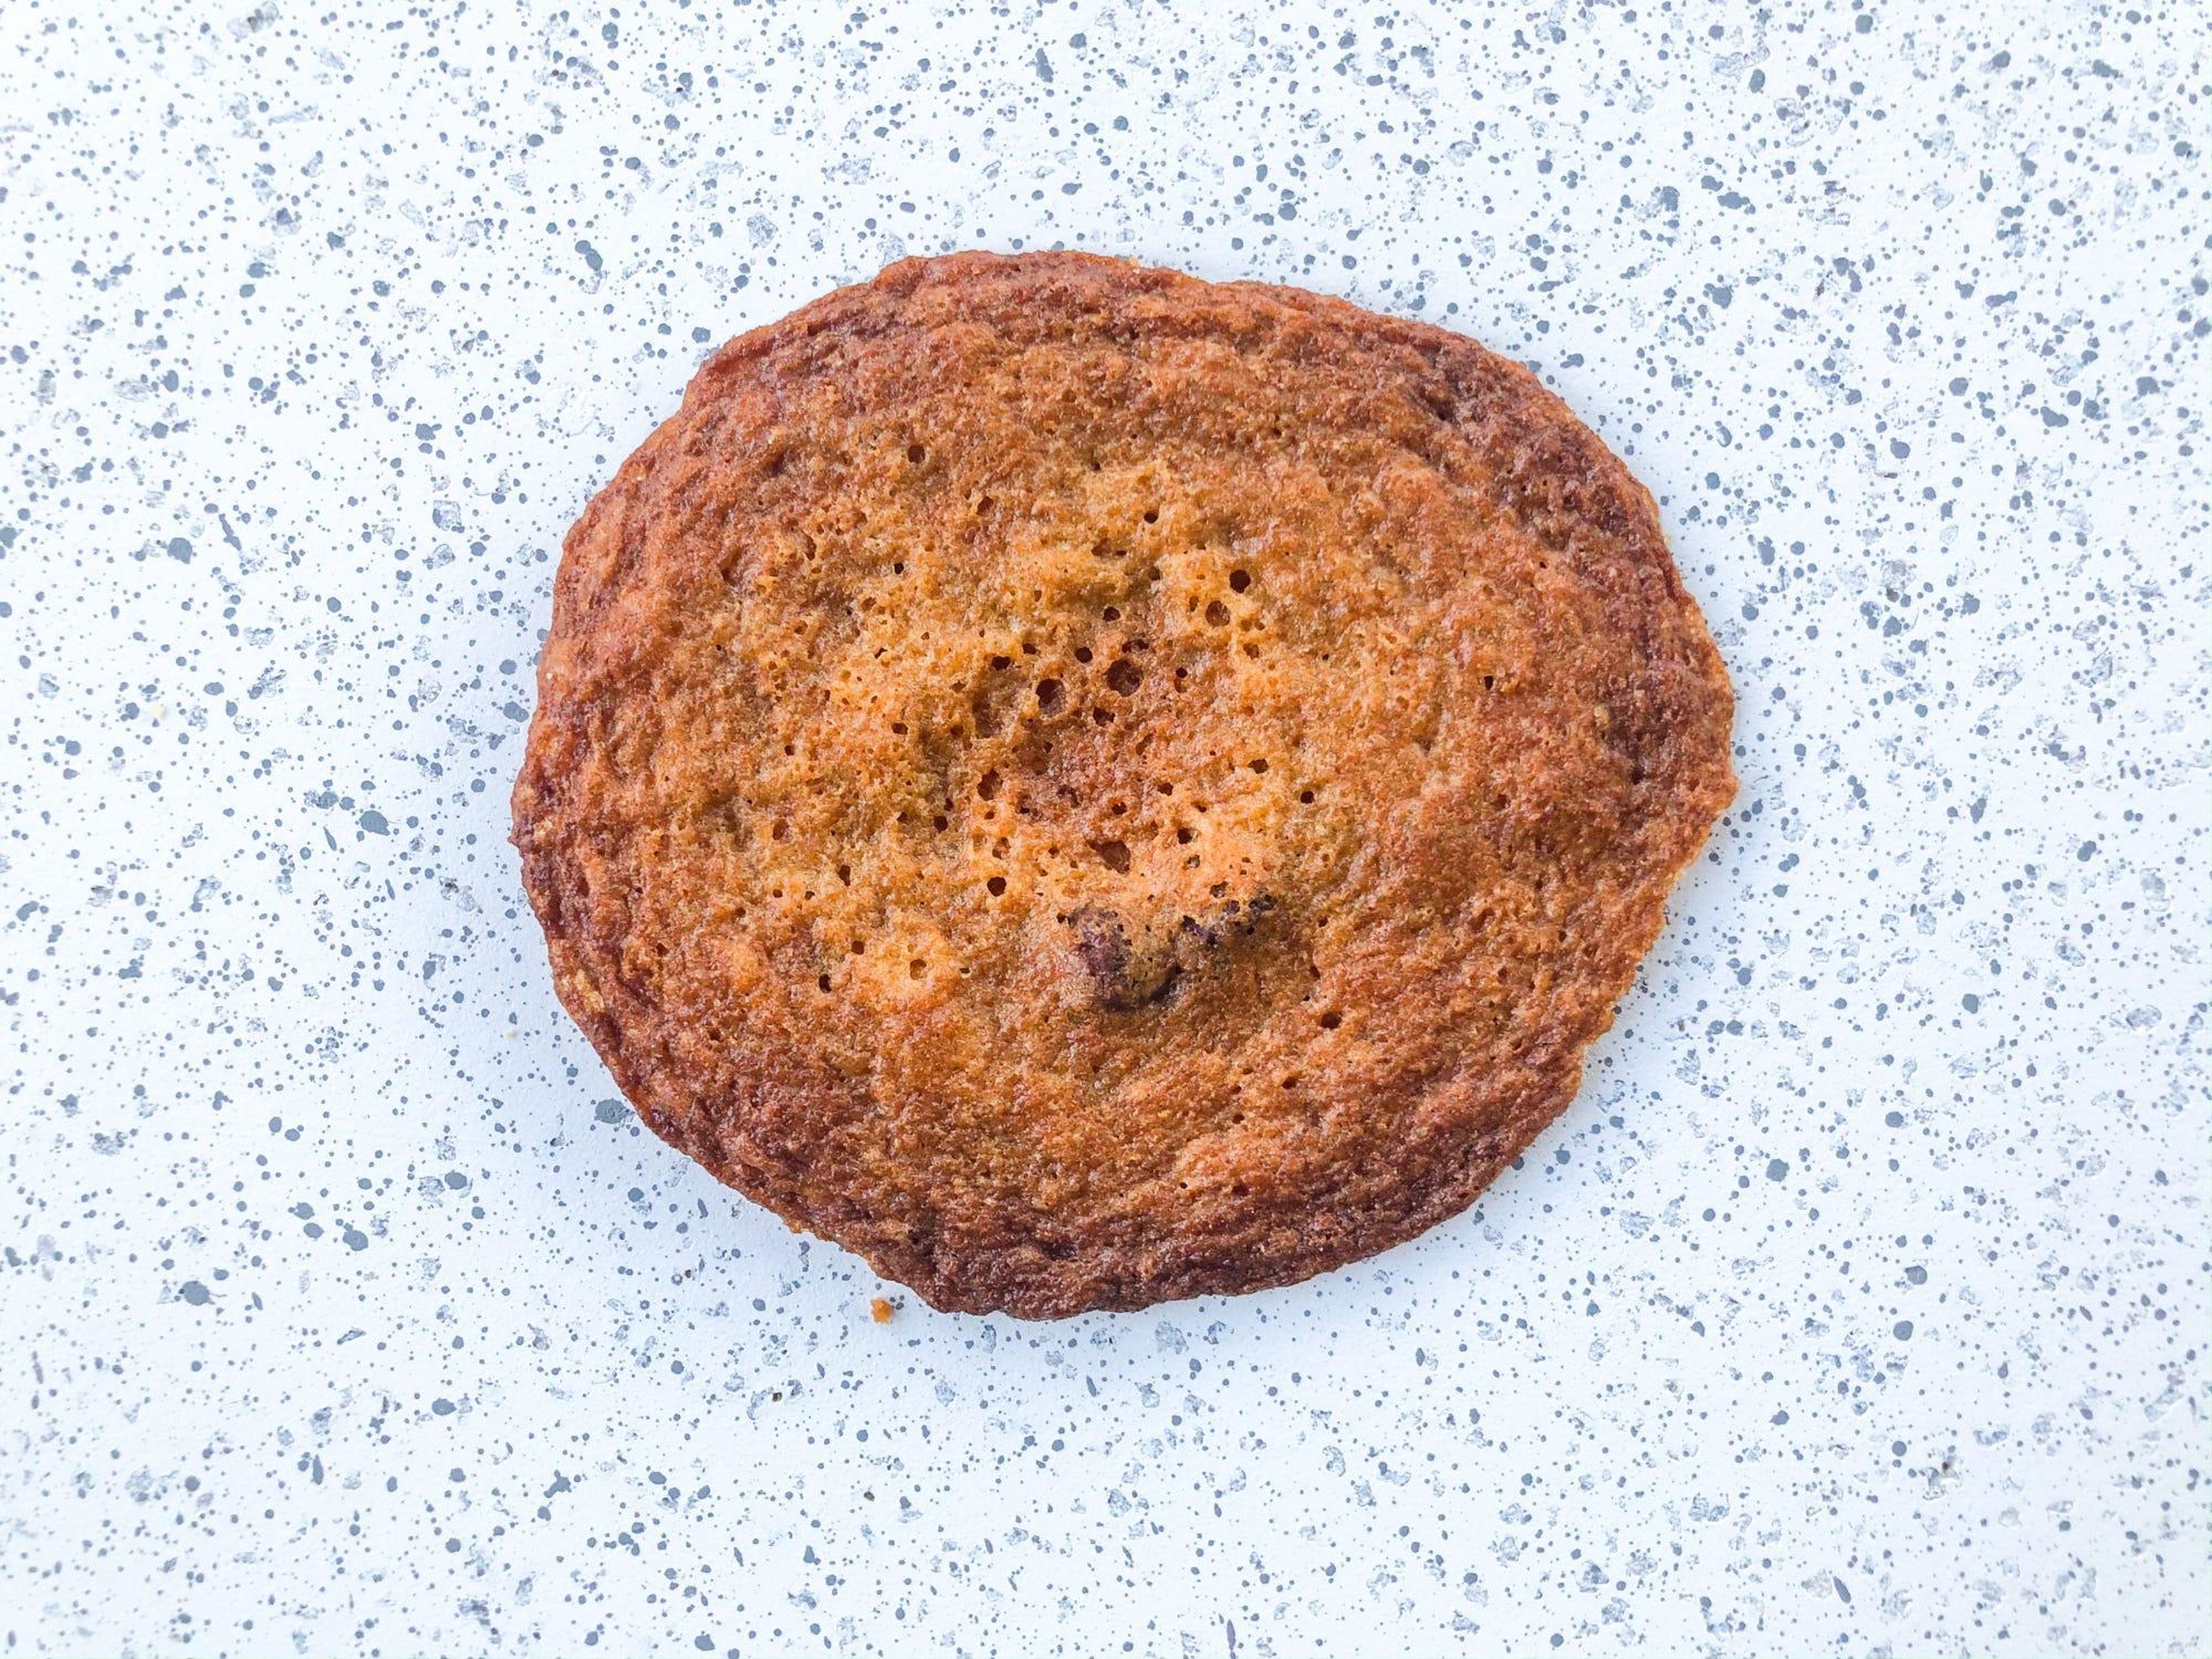 A cookie with too little flour.